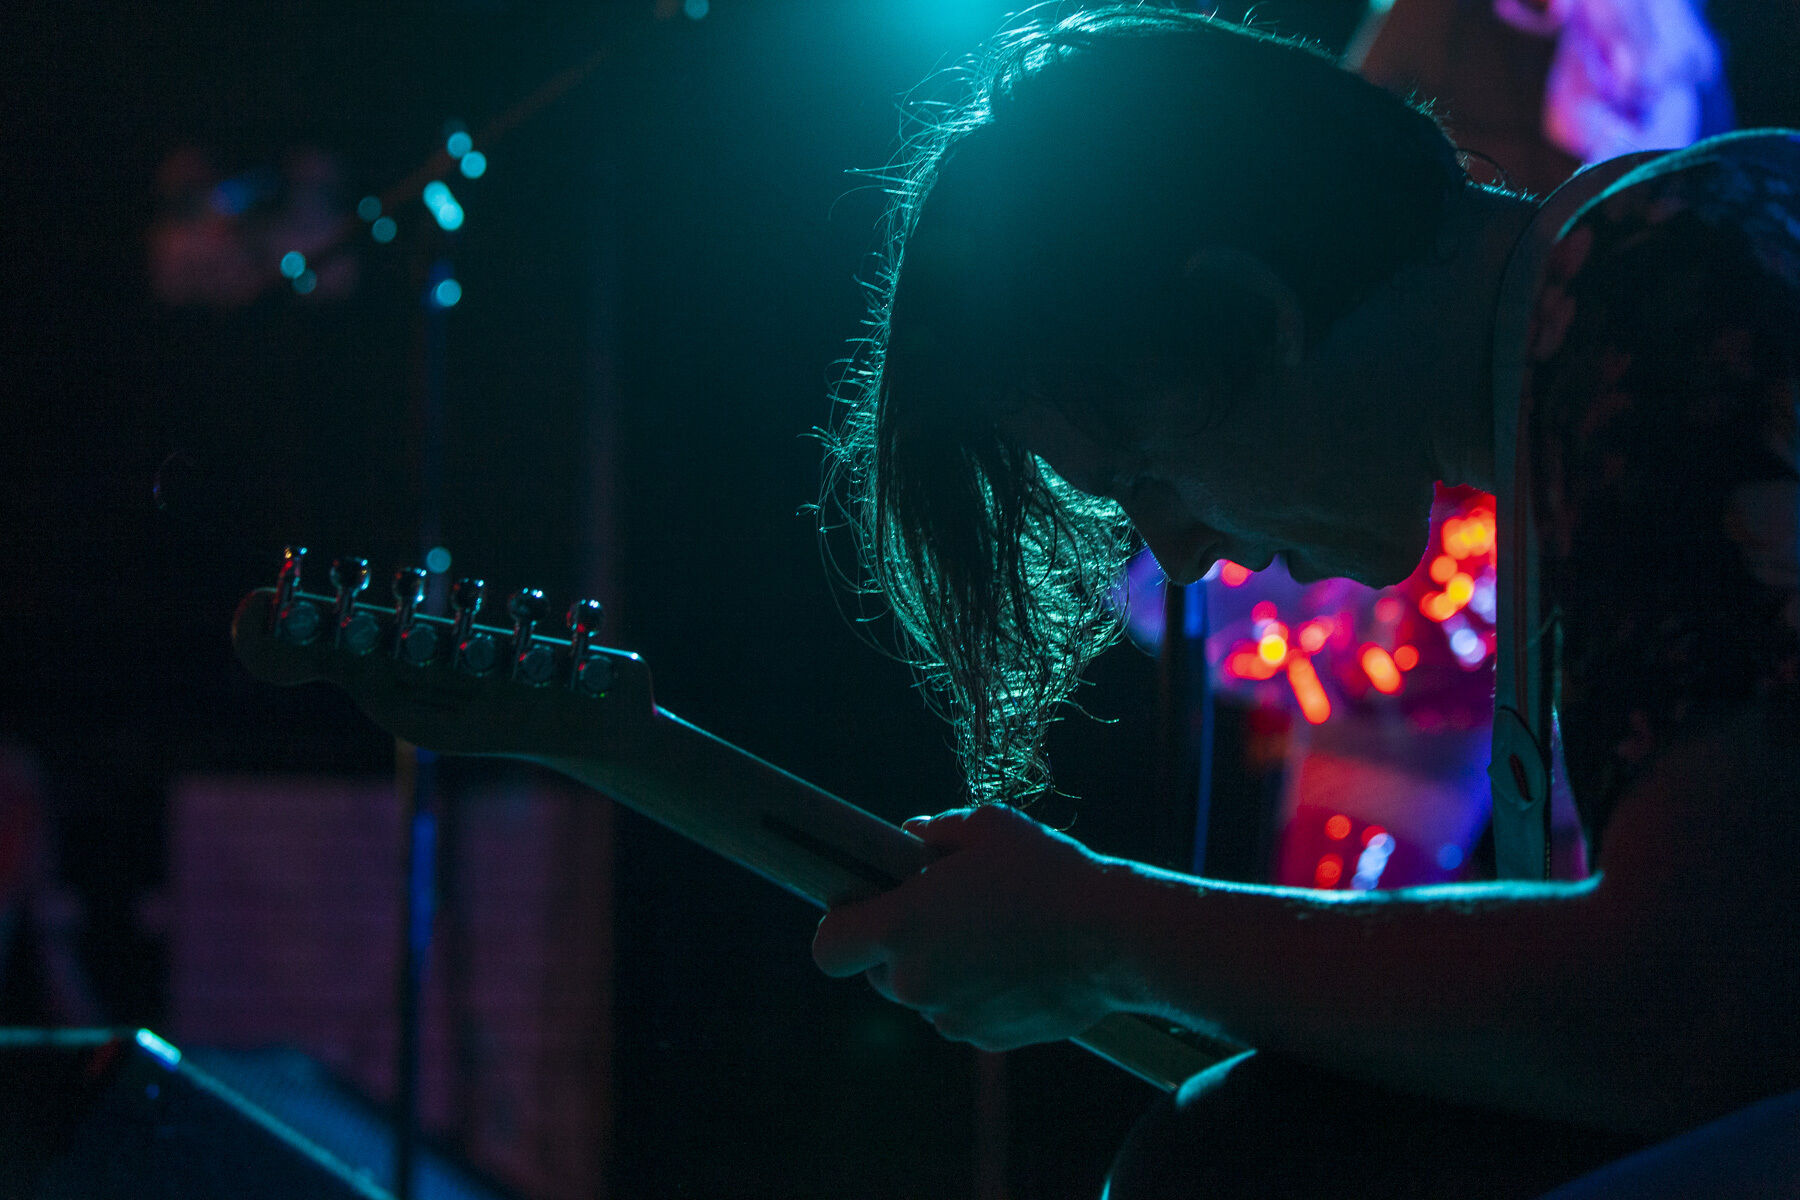 Guitarist silhouetted by lights performing on stage